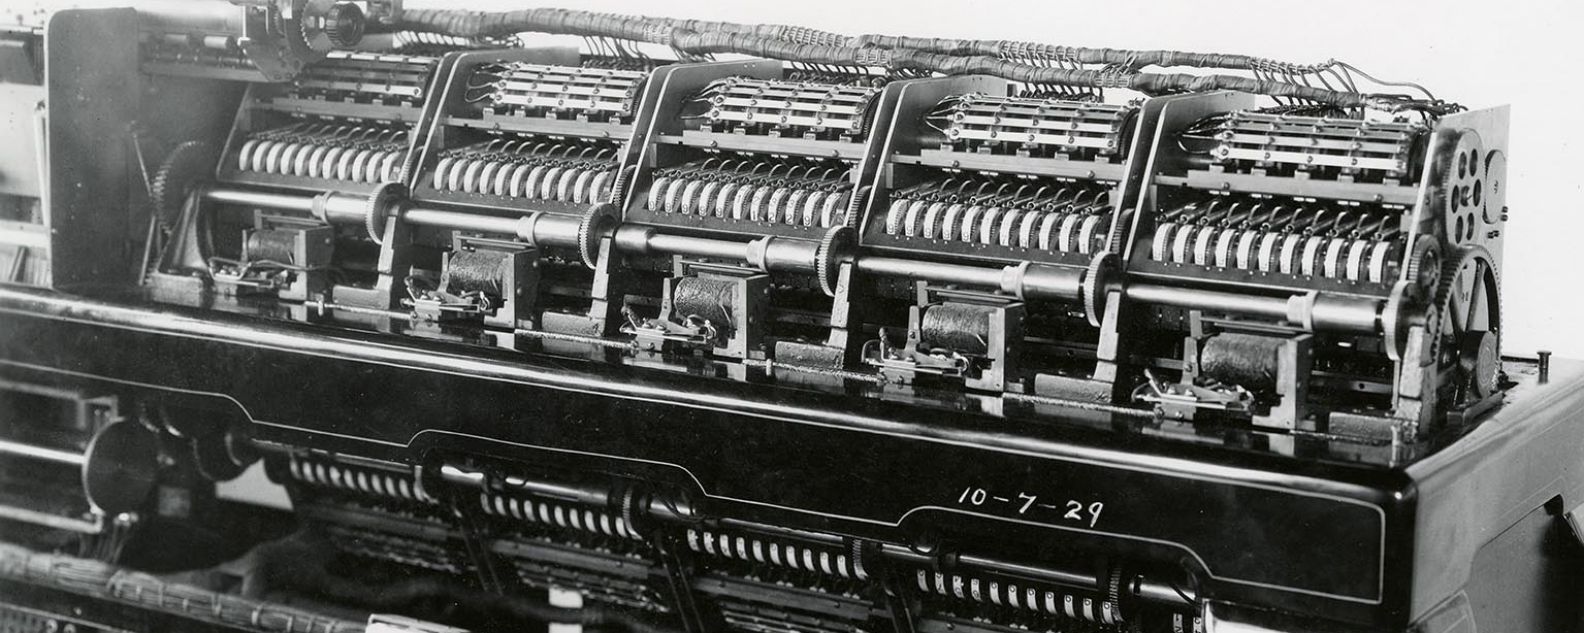 A "Columbia machine" early electromechanical calculator from 1929.